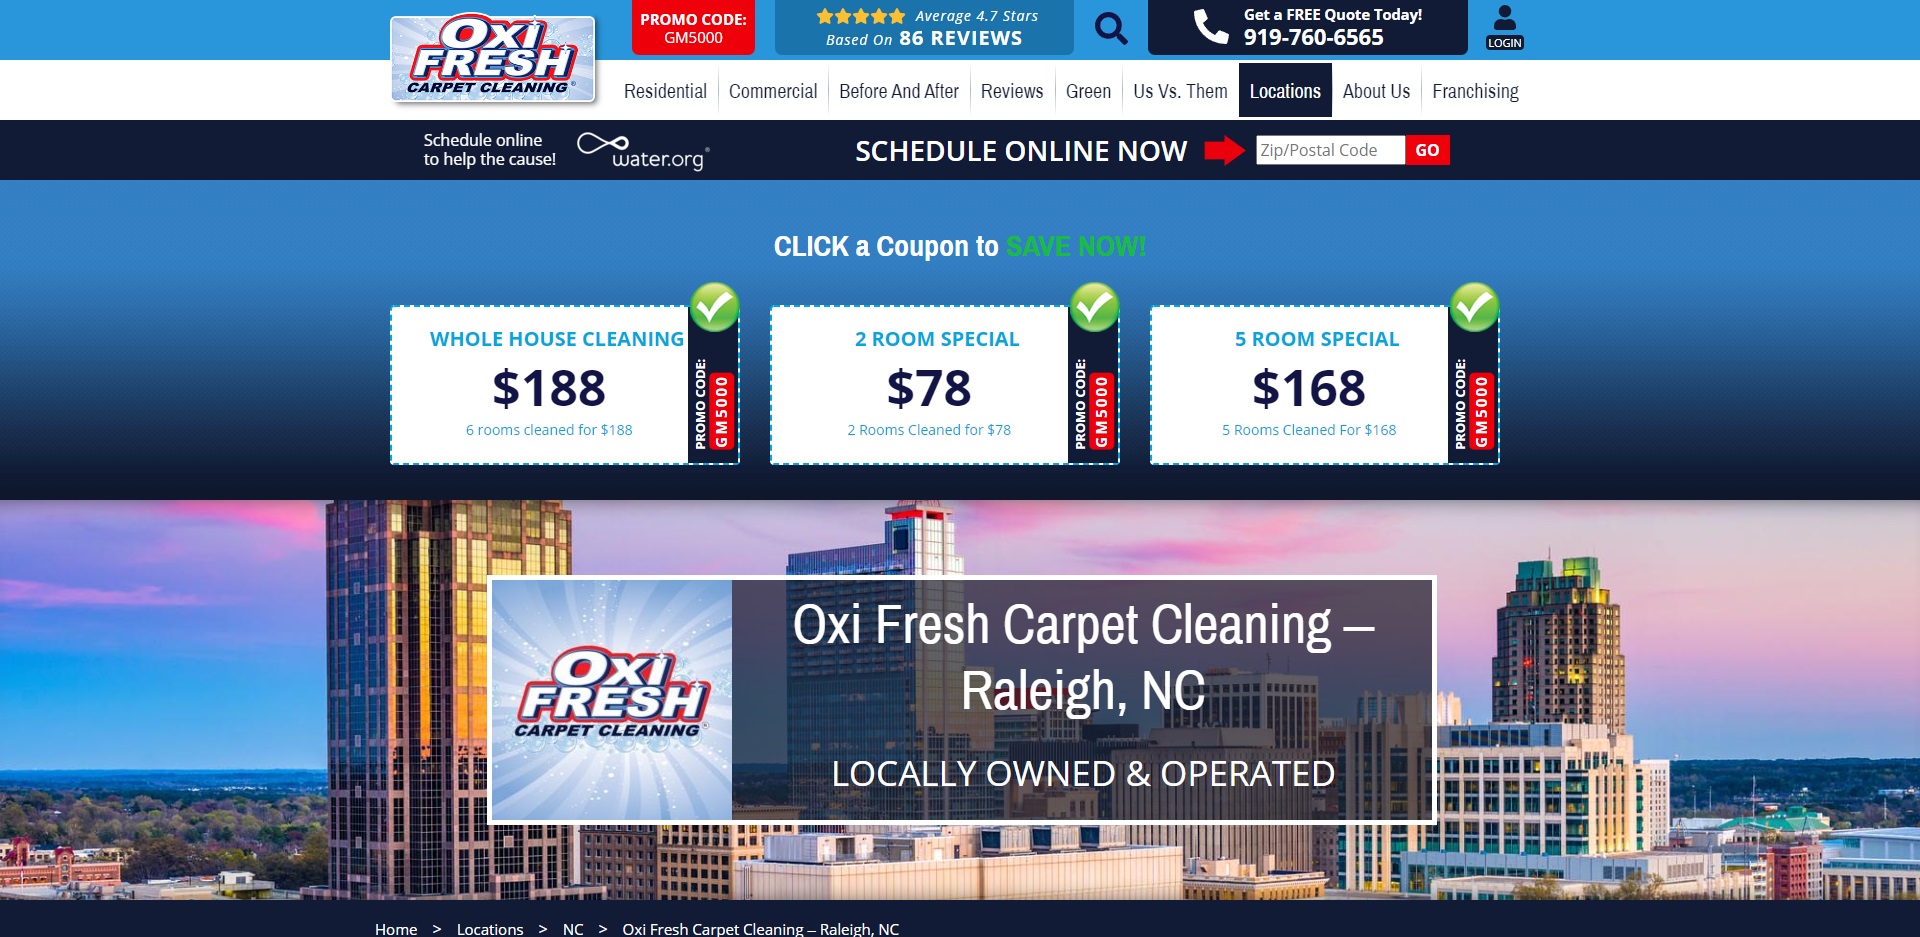 The Best Carpet Cleaning Service in Raleigh, NC